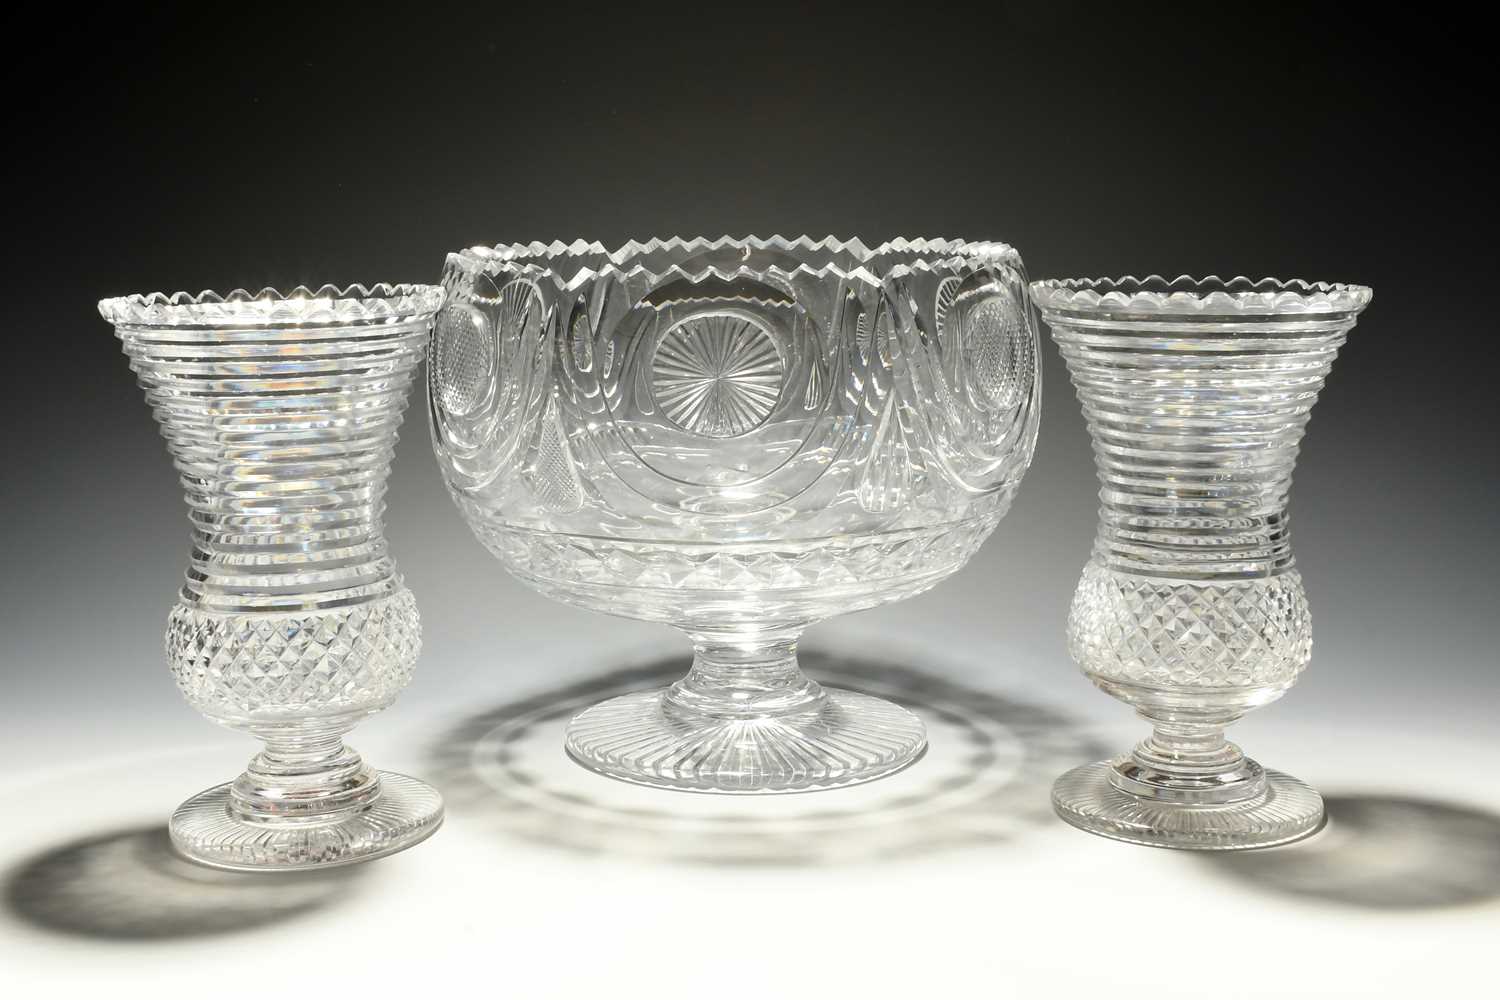 A large cut glass punchbowl, 19th century, cut with star and diamond roundels between swags, and a